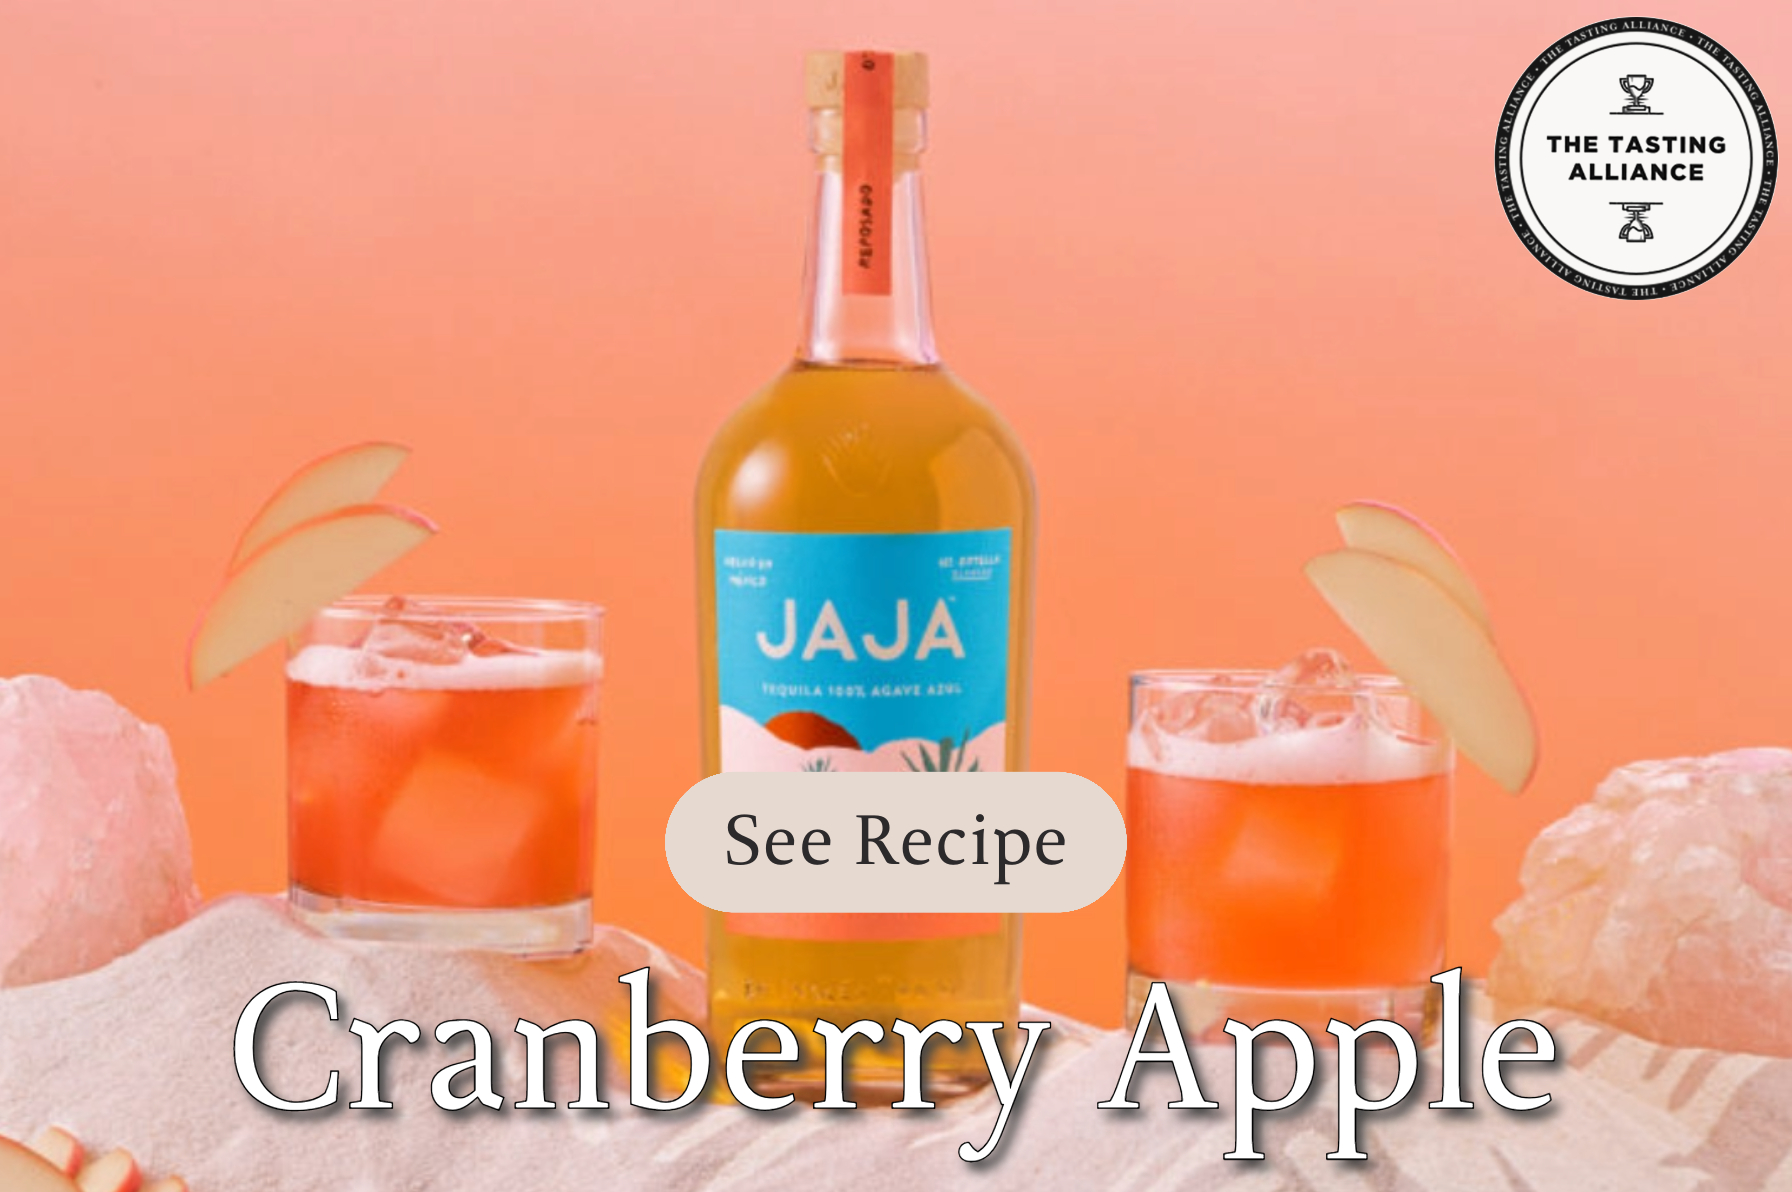 The recipe for The Tasting Alliance's featured Cranberry Apple Cocktail